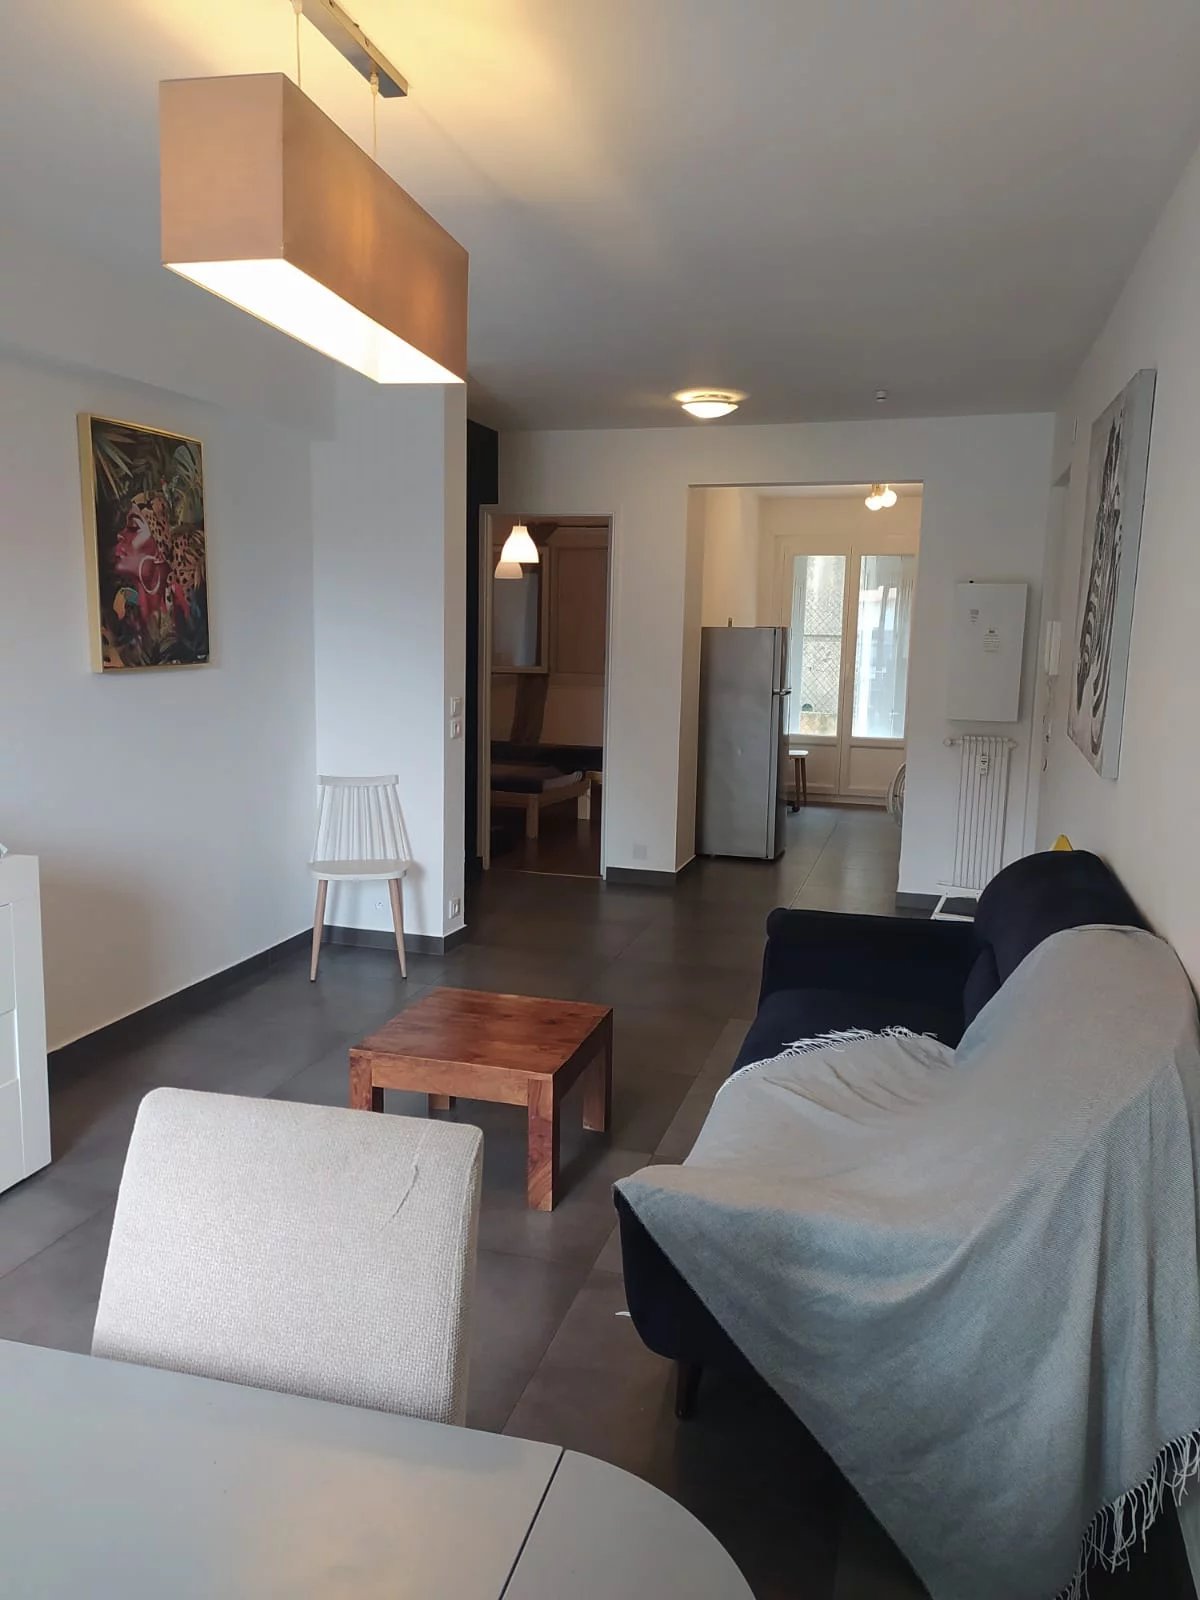 3-Bedroom Spacious Apartment at a Small Price!